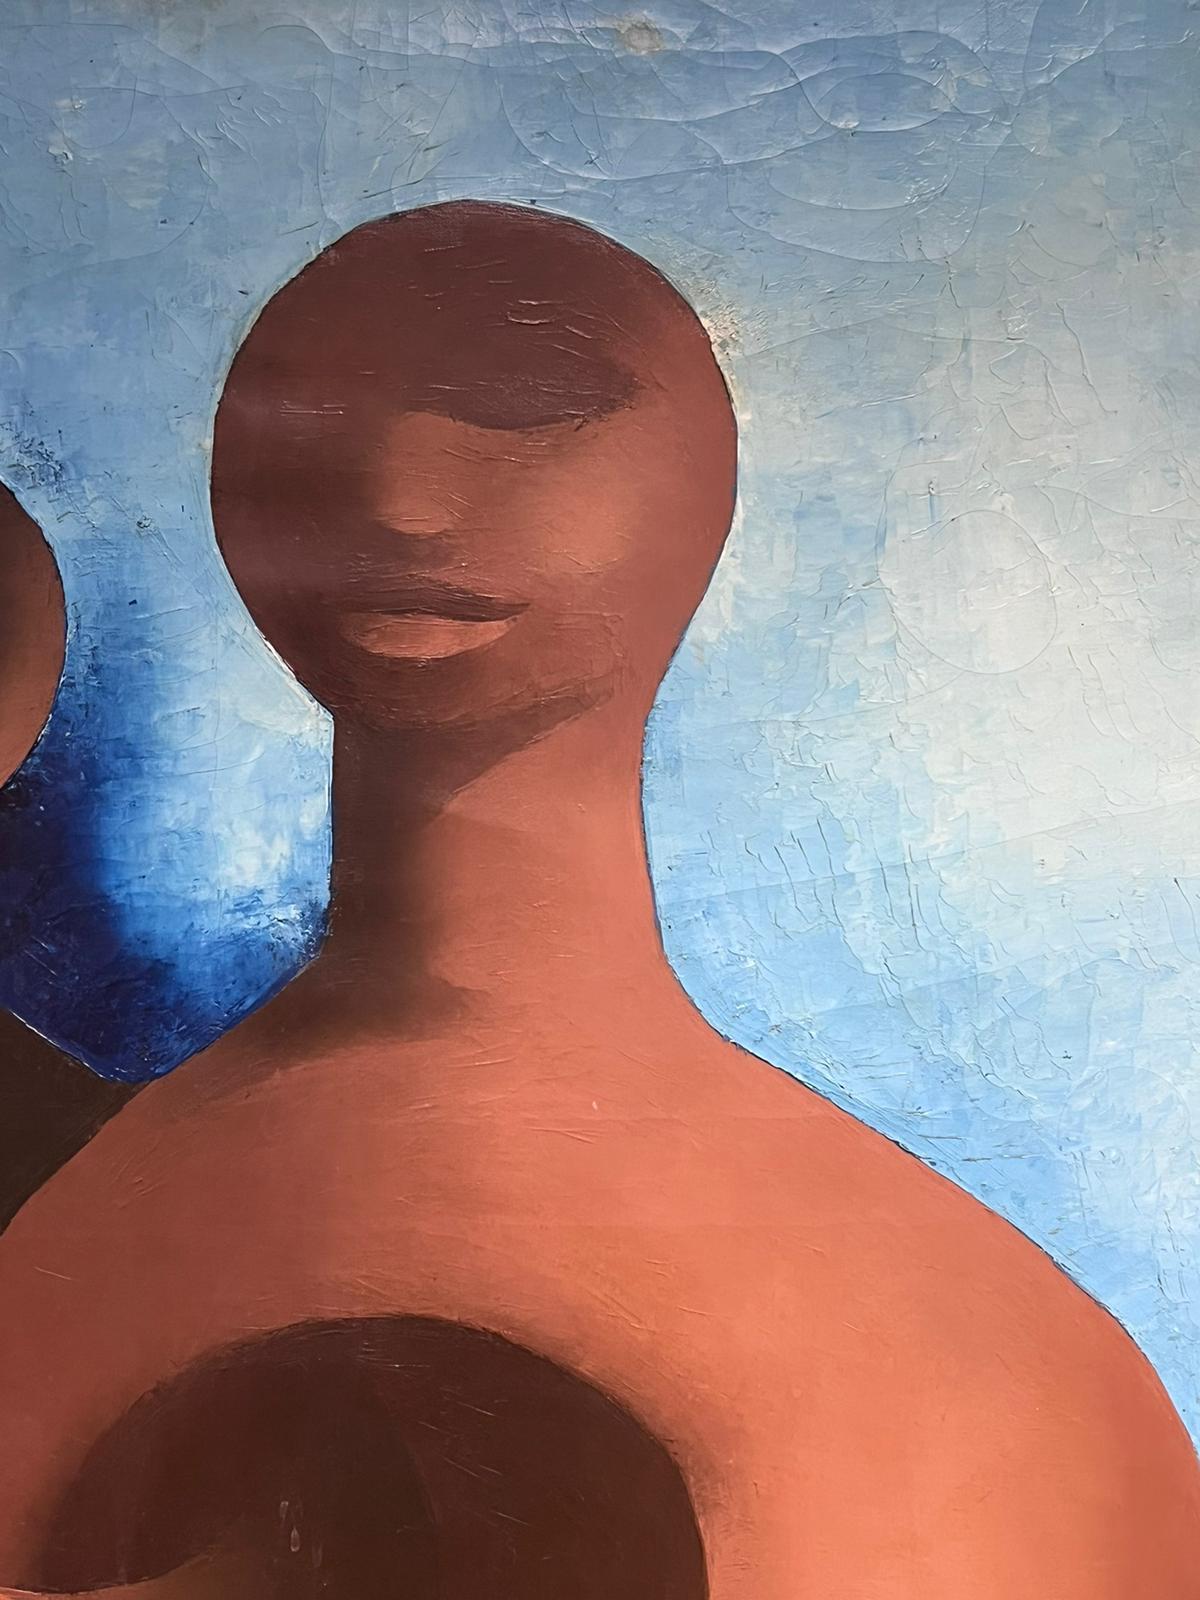 Figures Entwined
by Joel Lacroix (French mid 20th century)
signed and dated verso
oil on canvas, unframed
canvas : 39.5 x 32 inches
provenance: private collection, France
condition: very good and sound condition